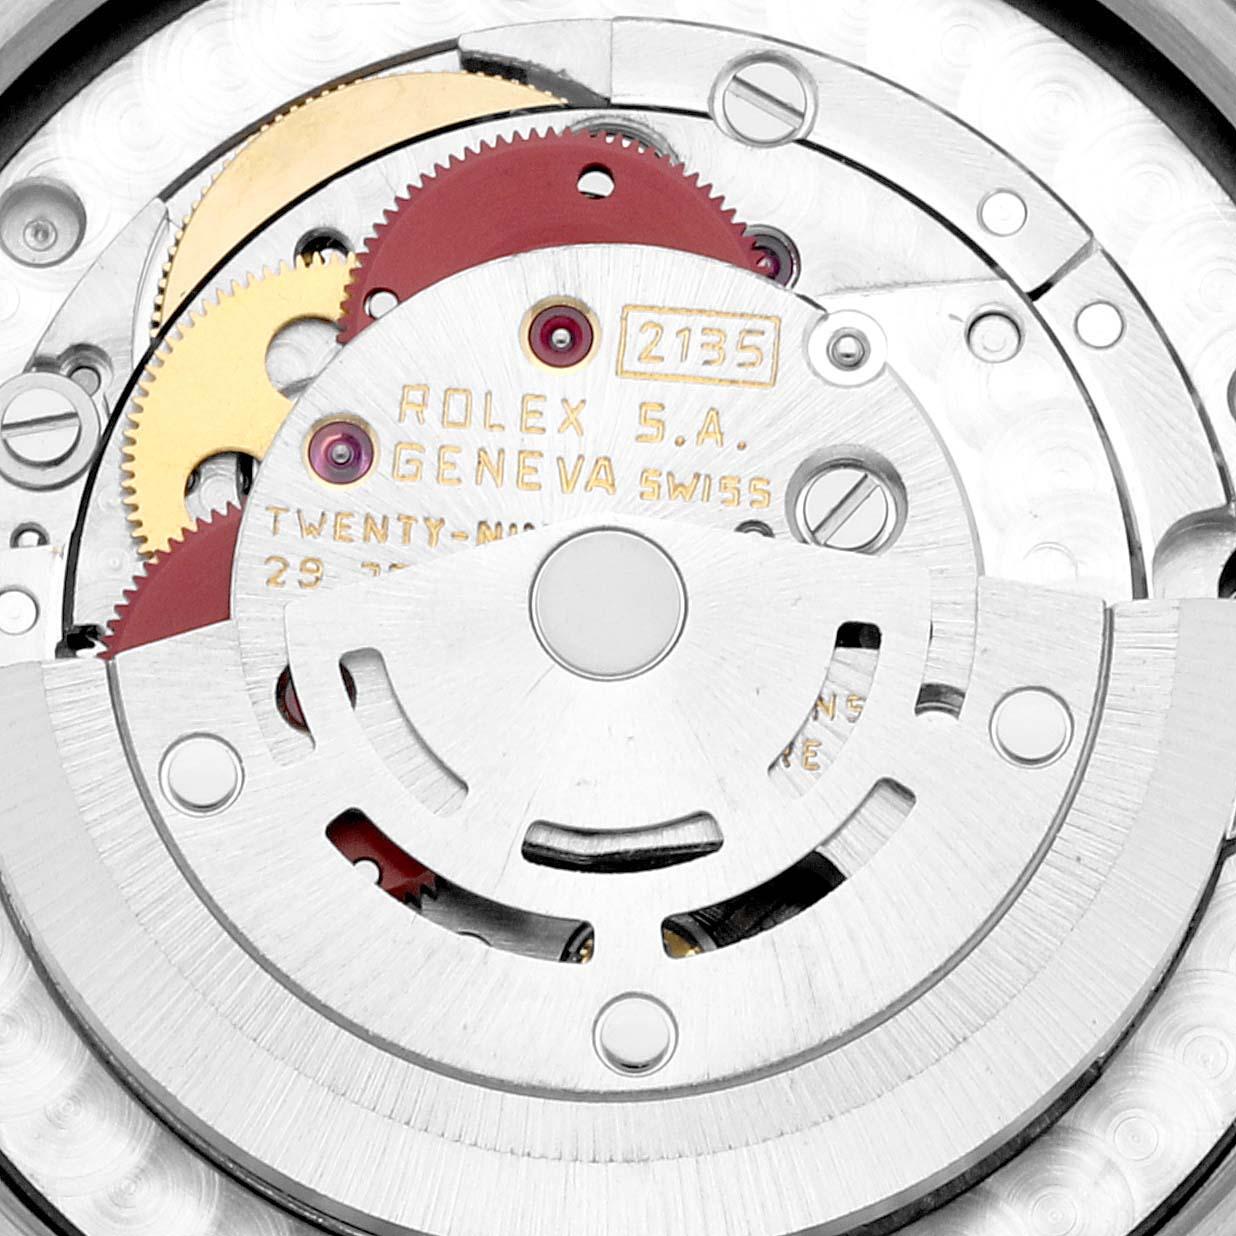 Rolex President Midsize Tridor White Yellow Rose Gold Diamond Ladies Watch 68279. Officially certified chronometer automatic self-winding movement. 18k white gold oyster case 31.0 mm in diameter. Rolex logo on the crown. 18K yellow gold fluted